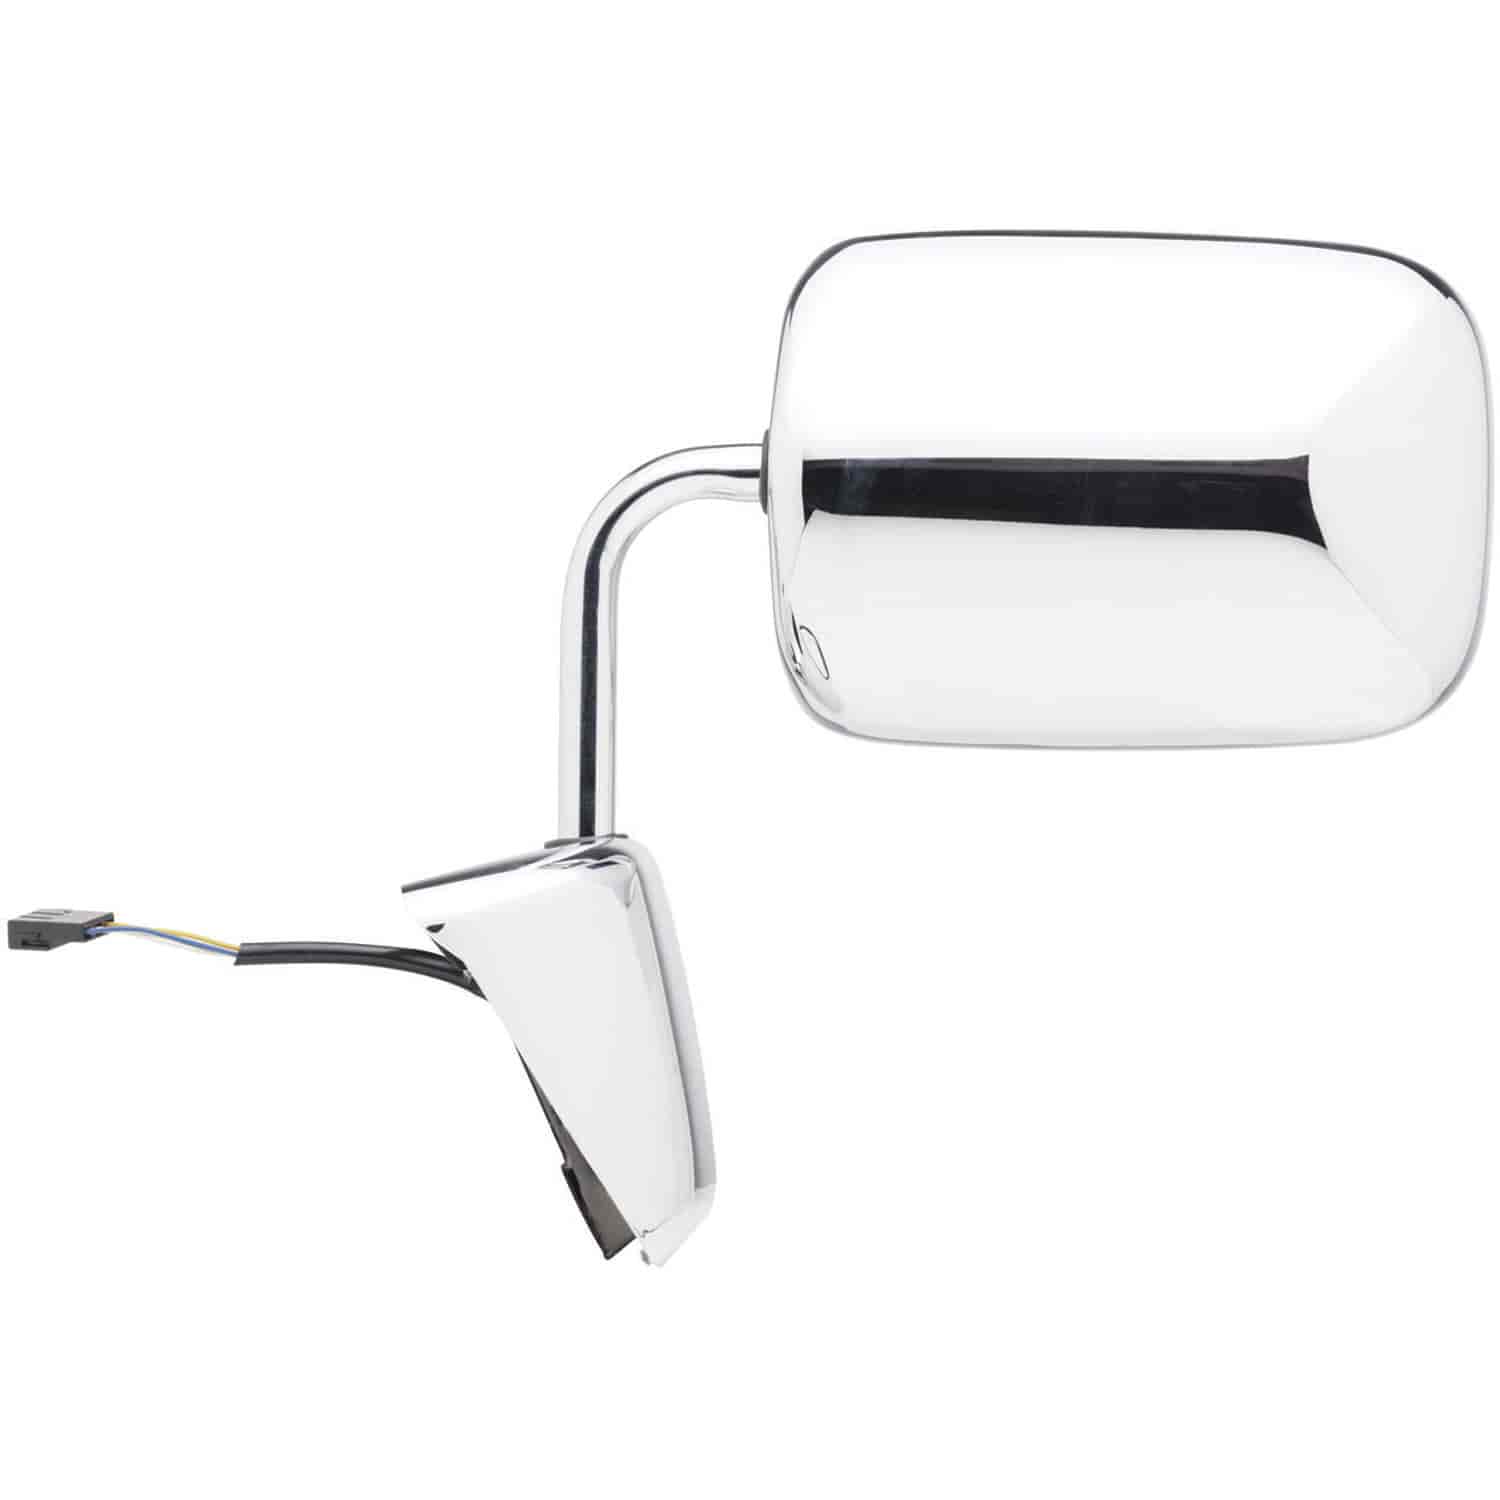 OEM Style Replacement mirror for 88-93 Dodge Pick Up/Ram Charger 6x9 option driver side mirror teste